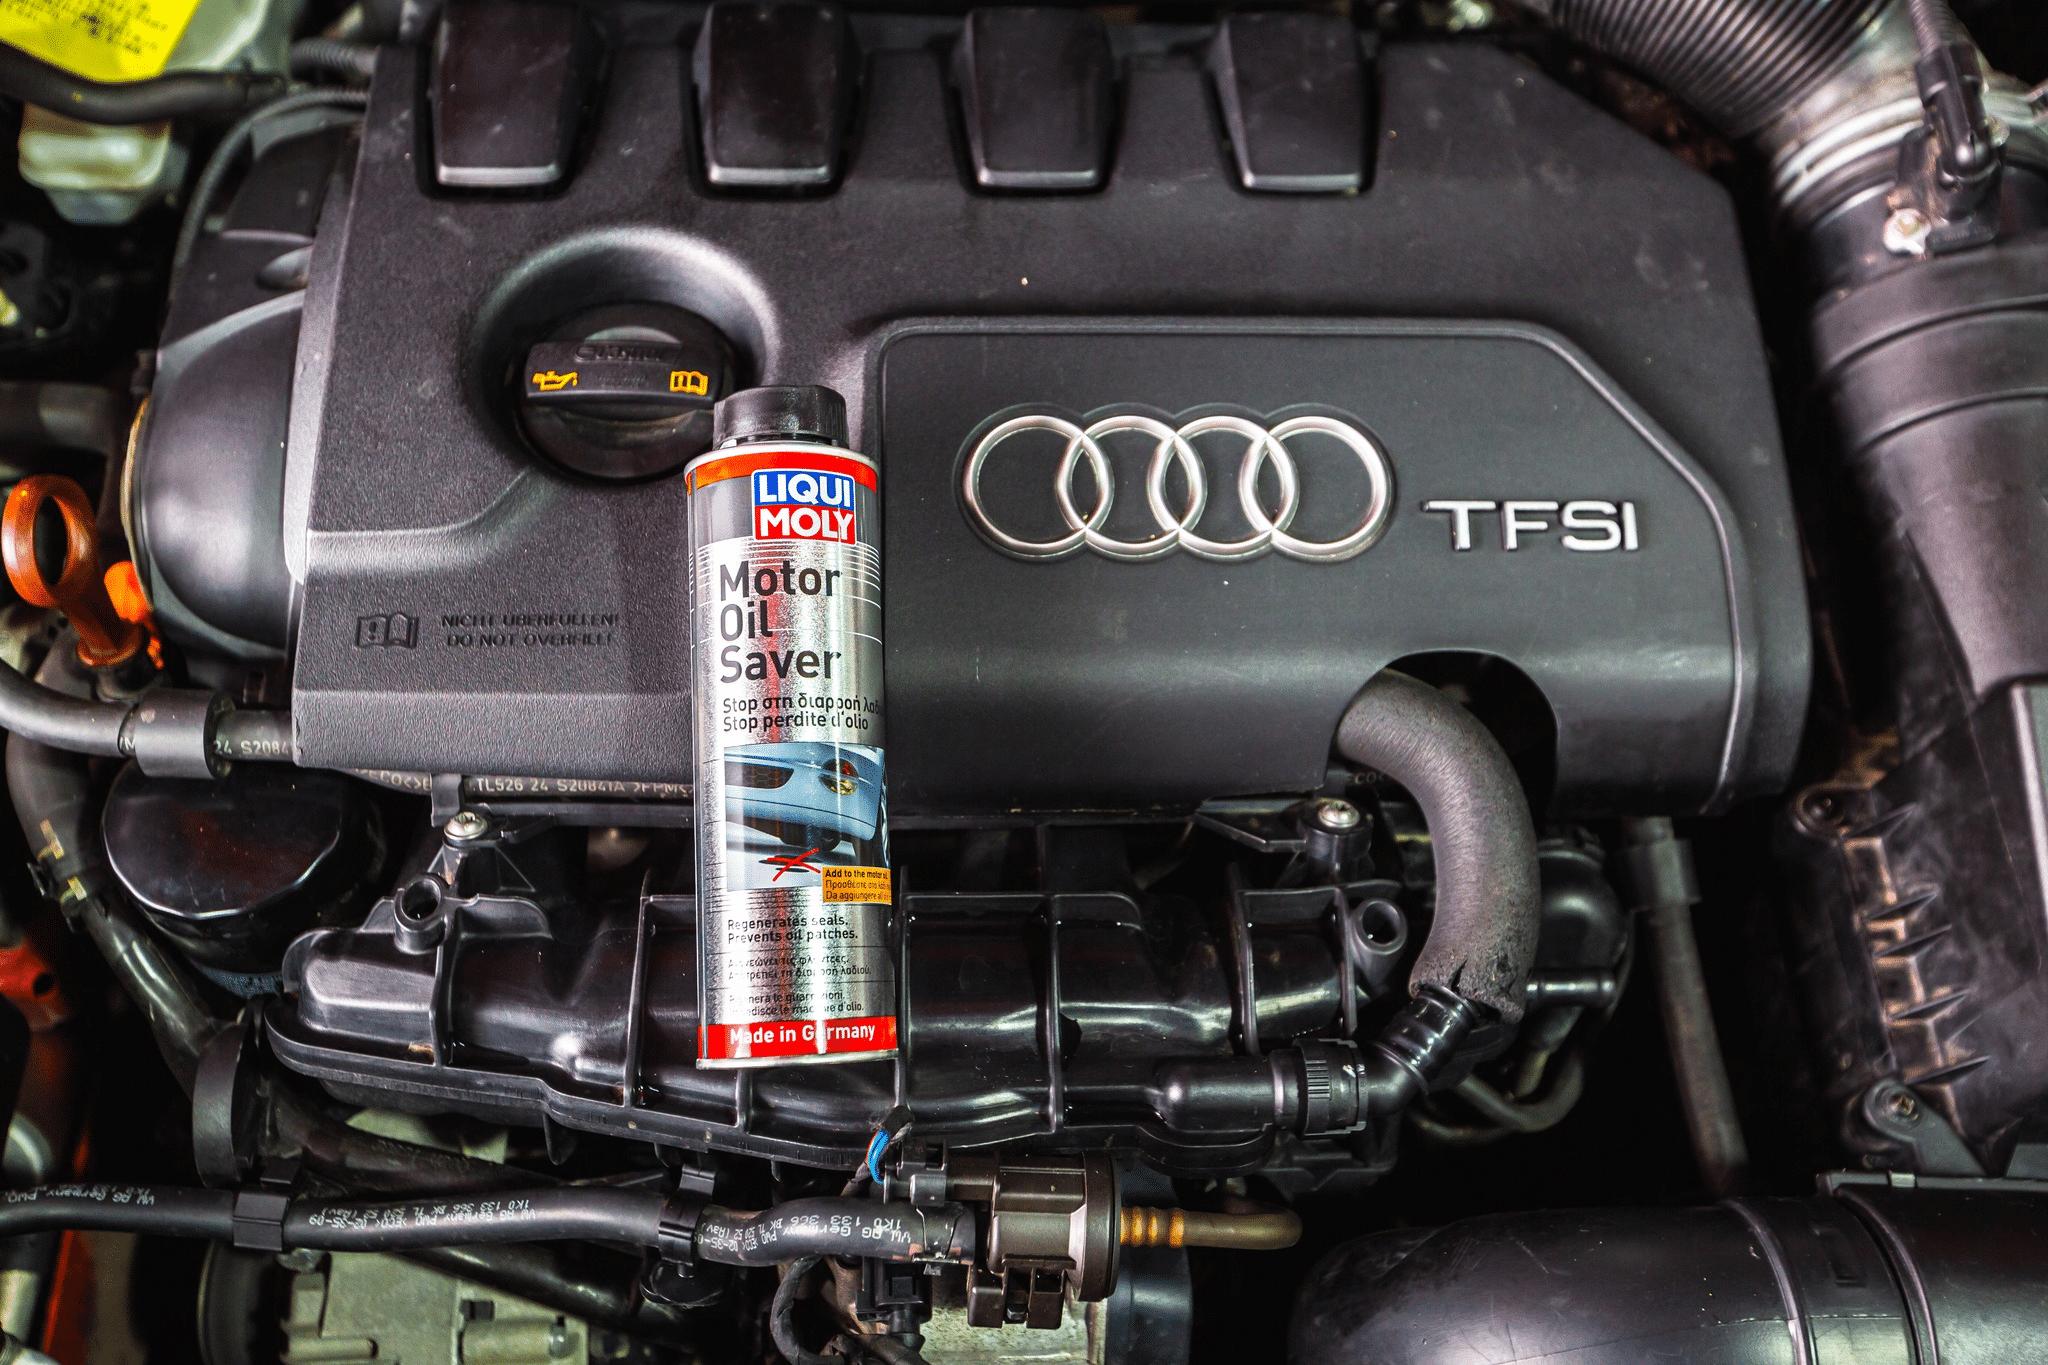 Oil additives being added to a car engine